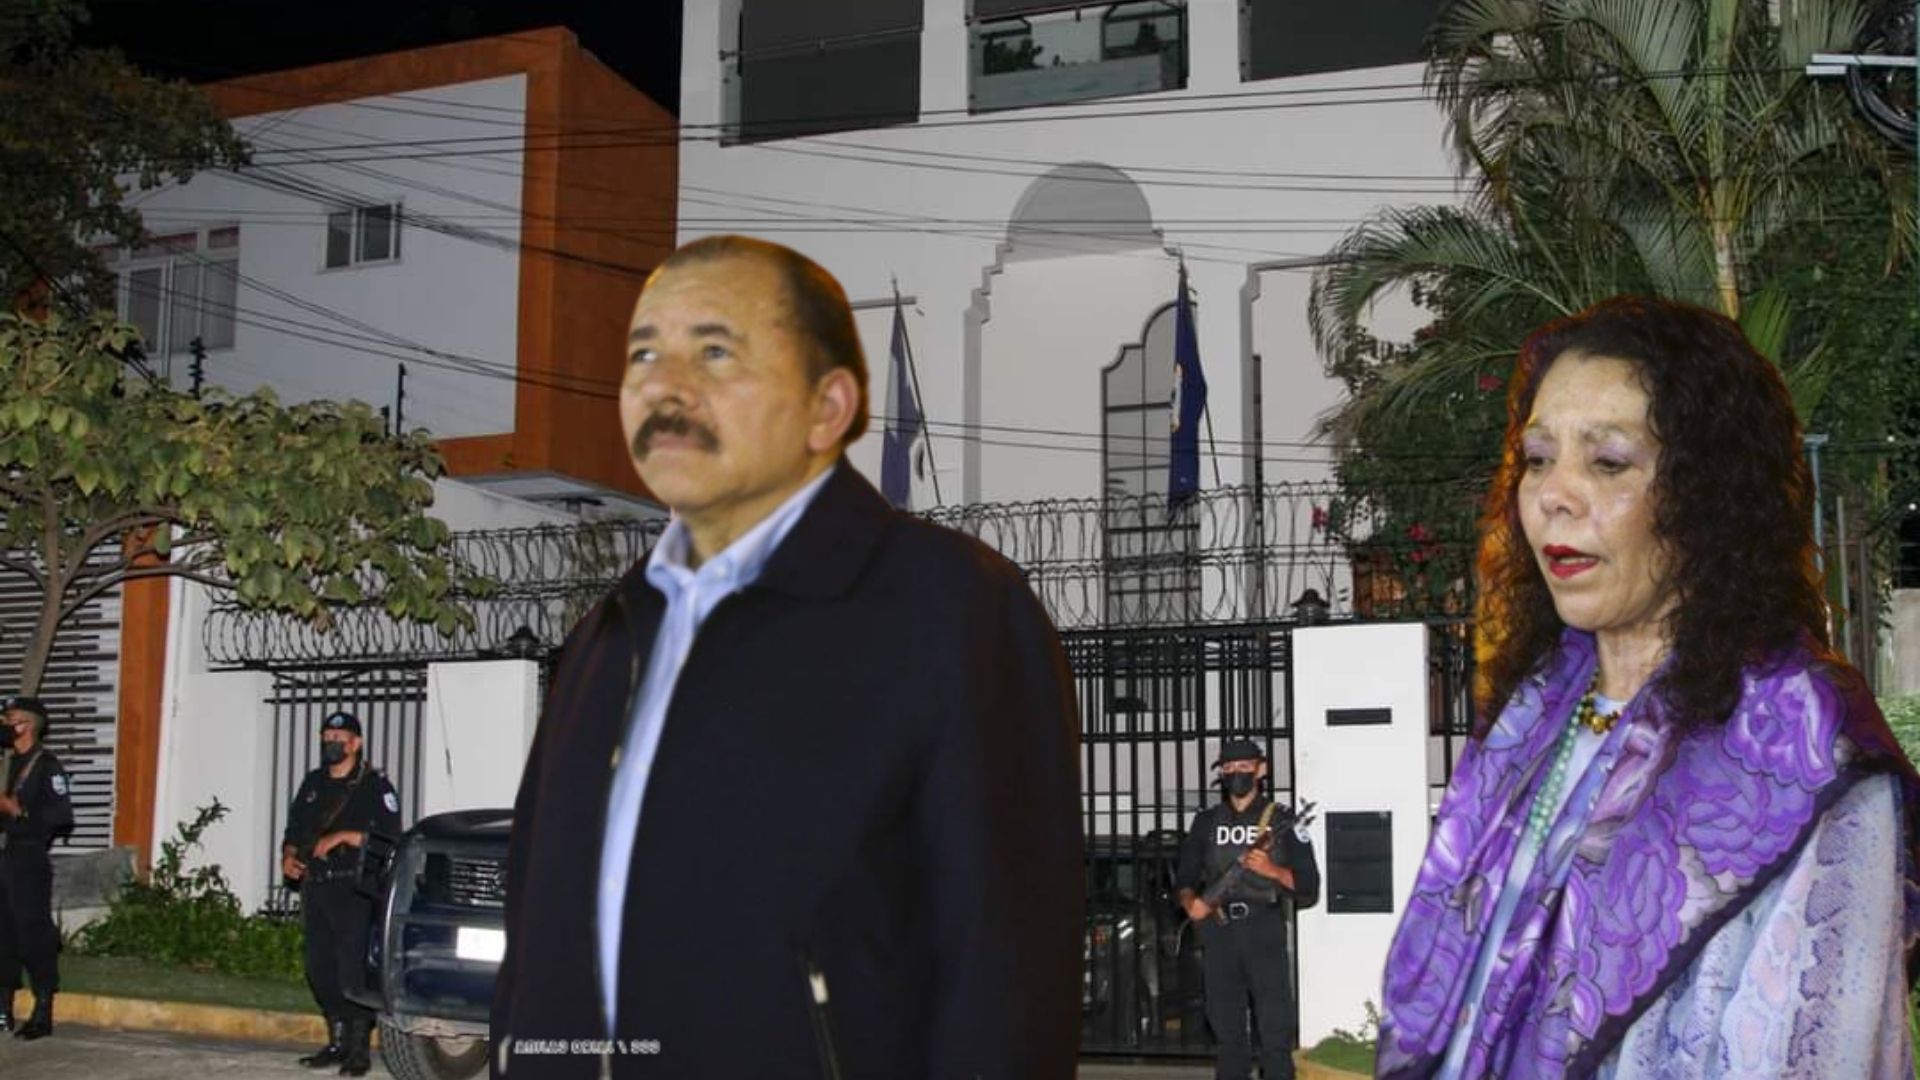 Ortega will use the building confiscated from the OAS to "commemorate" the 44th anniversary of the assault on the National Palace